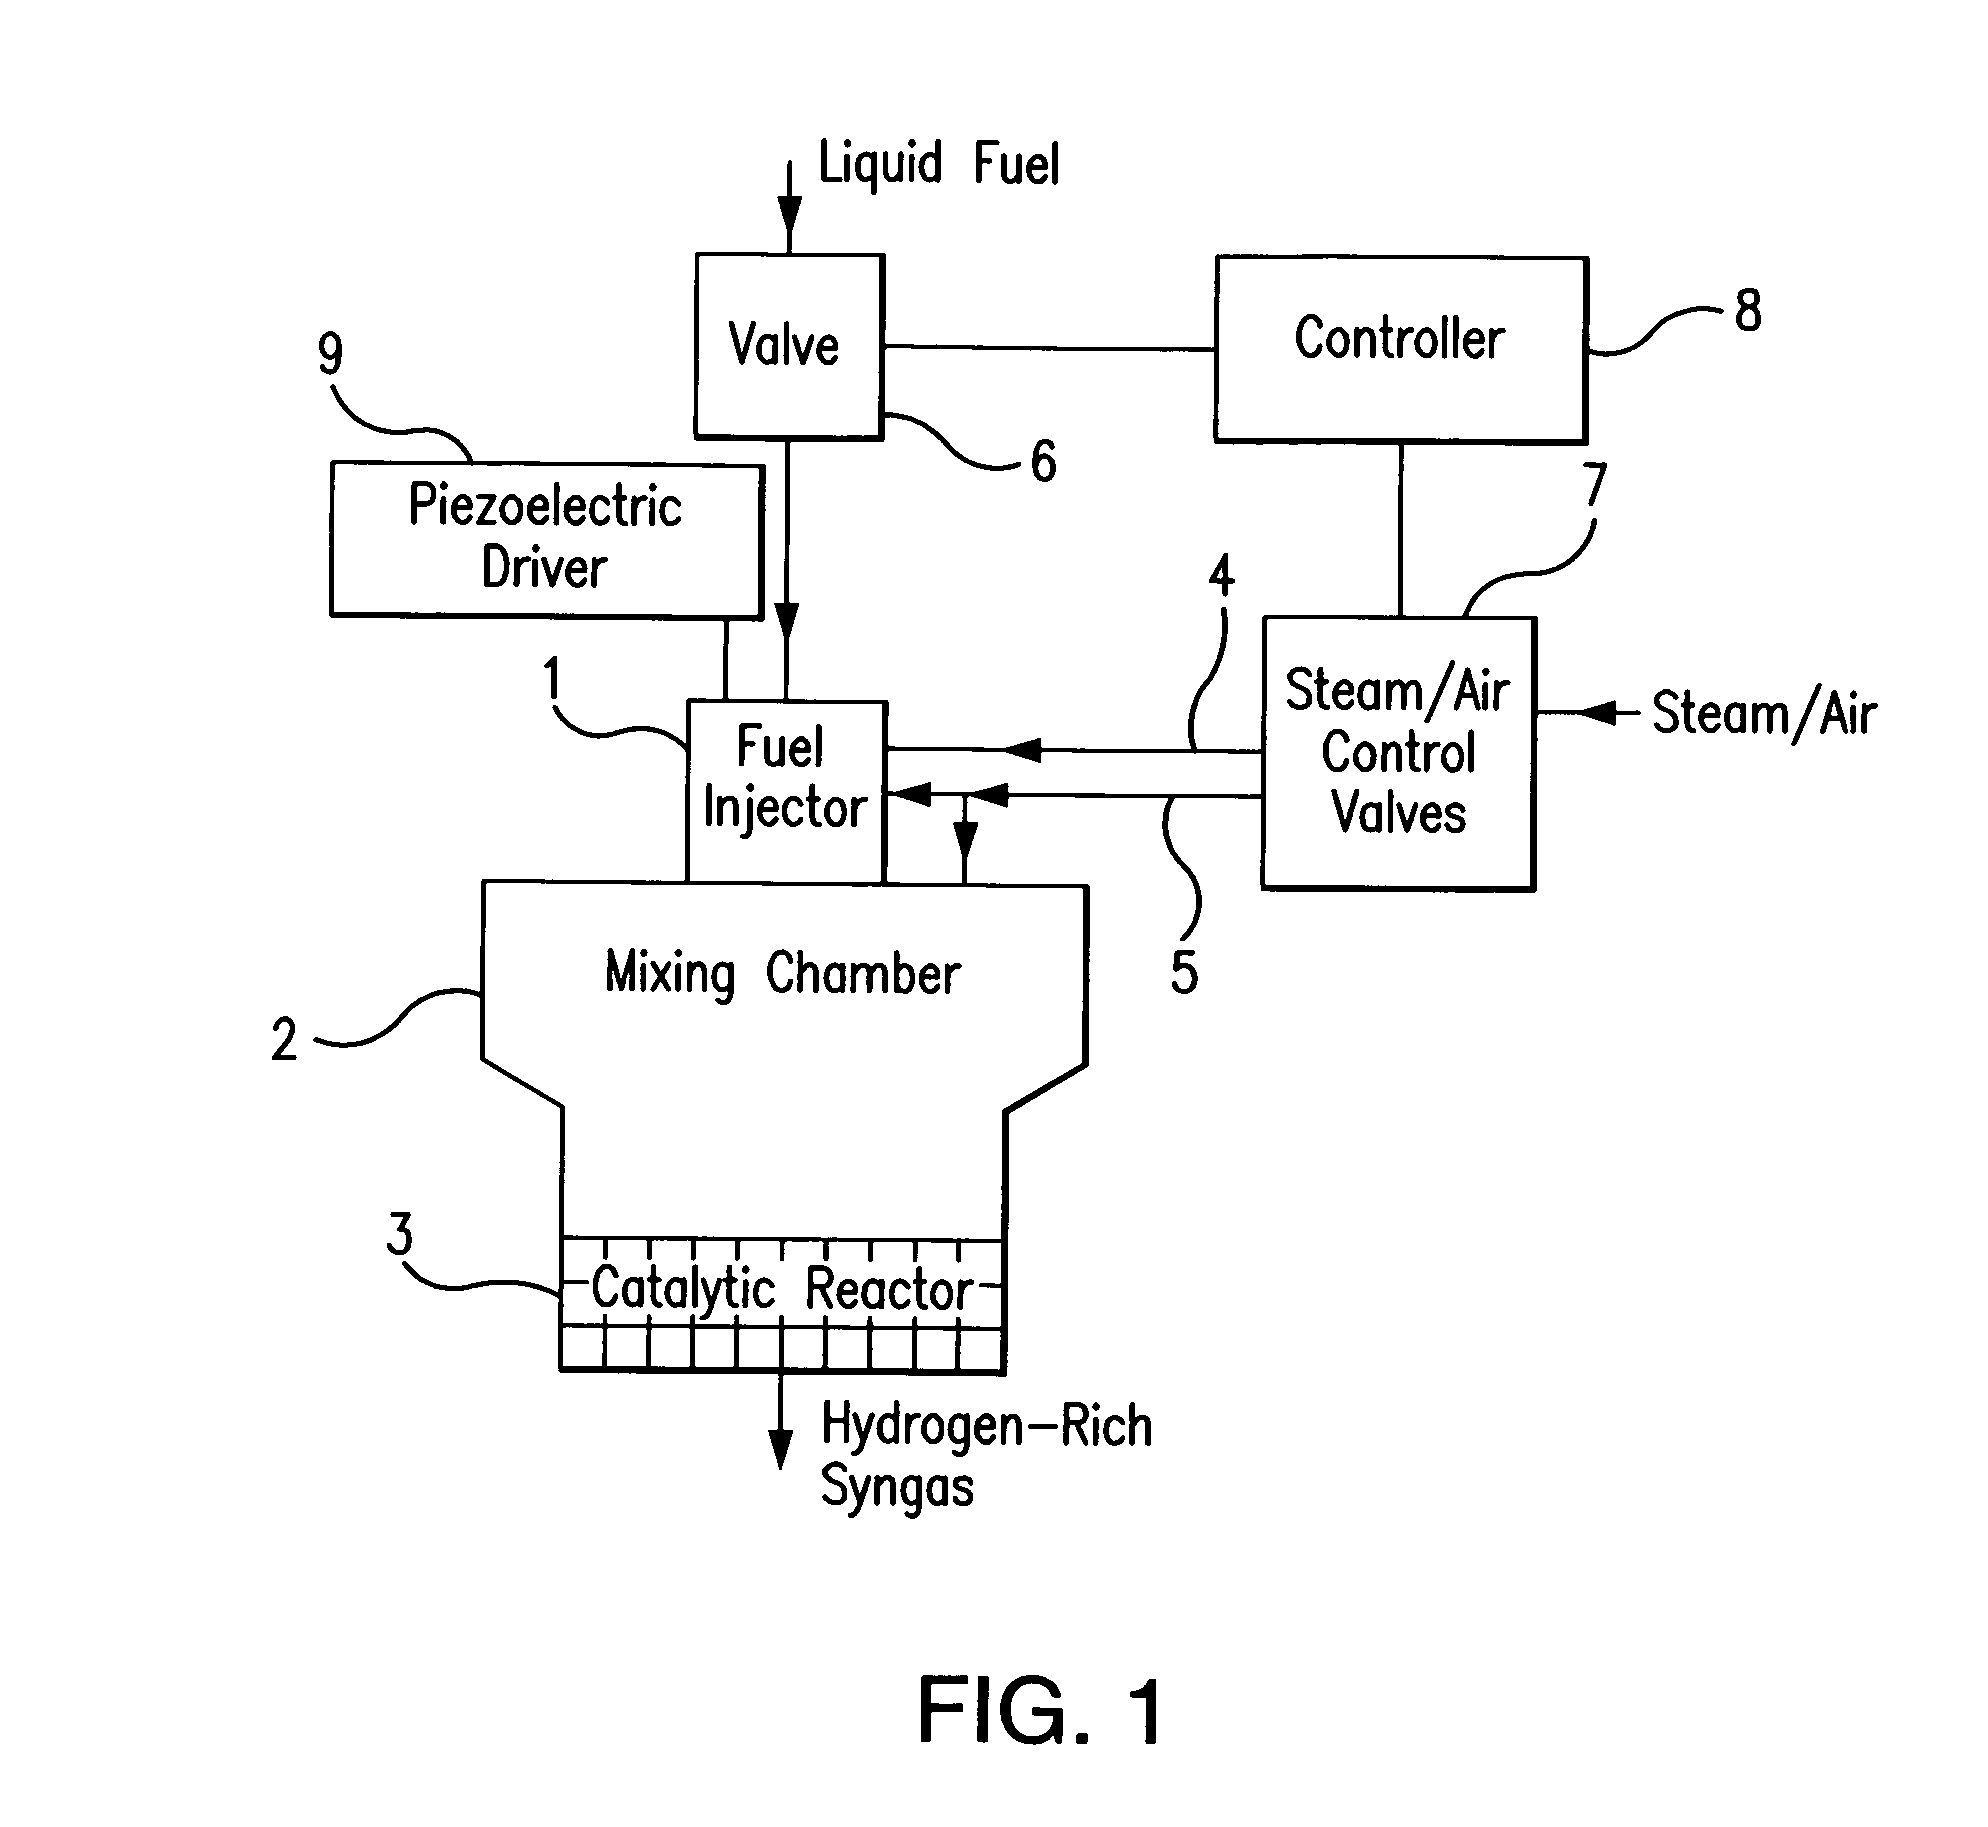 Fuel injection and mixing systems having piezoelectric elements and methods of using the same